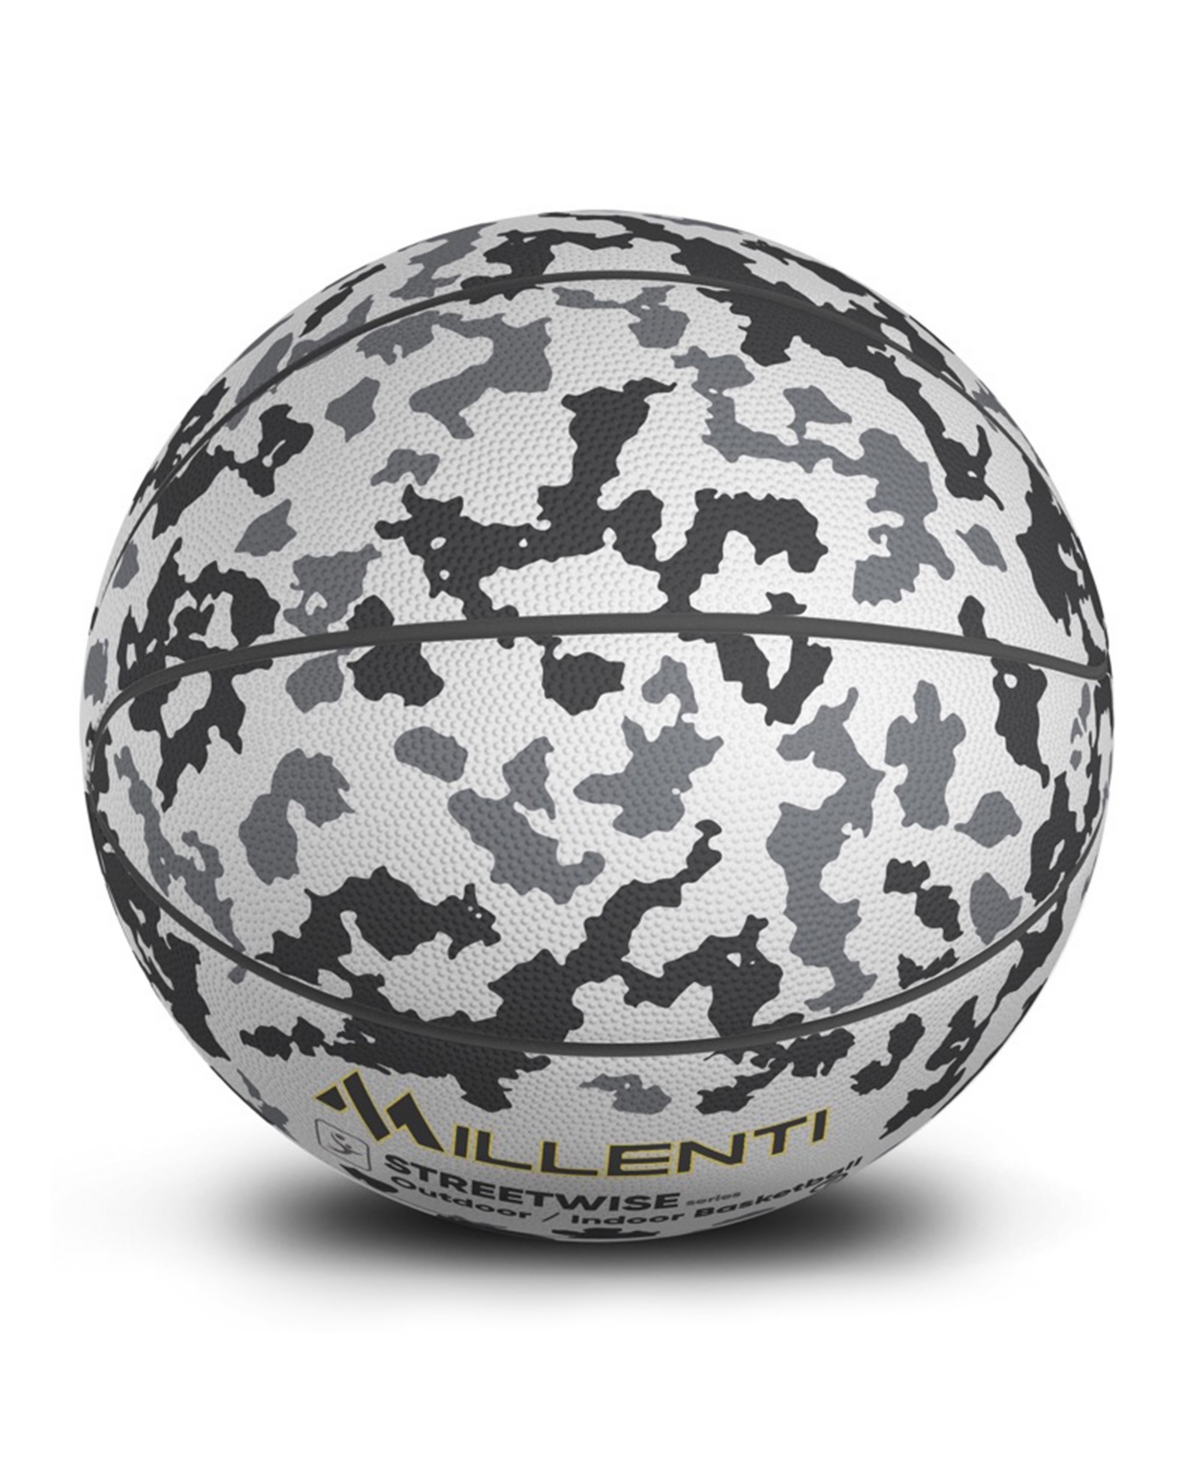 Millenti Basketball Official Size 7 Outdoor Indoor Ball Street Wise Adult Sized Basketball For Men And Women In Gray